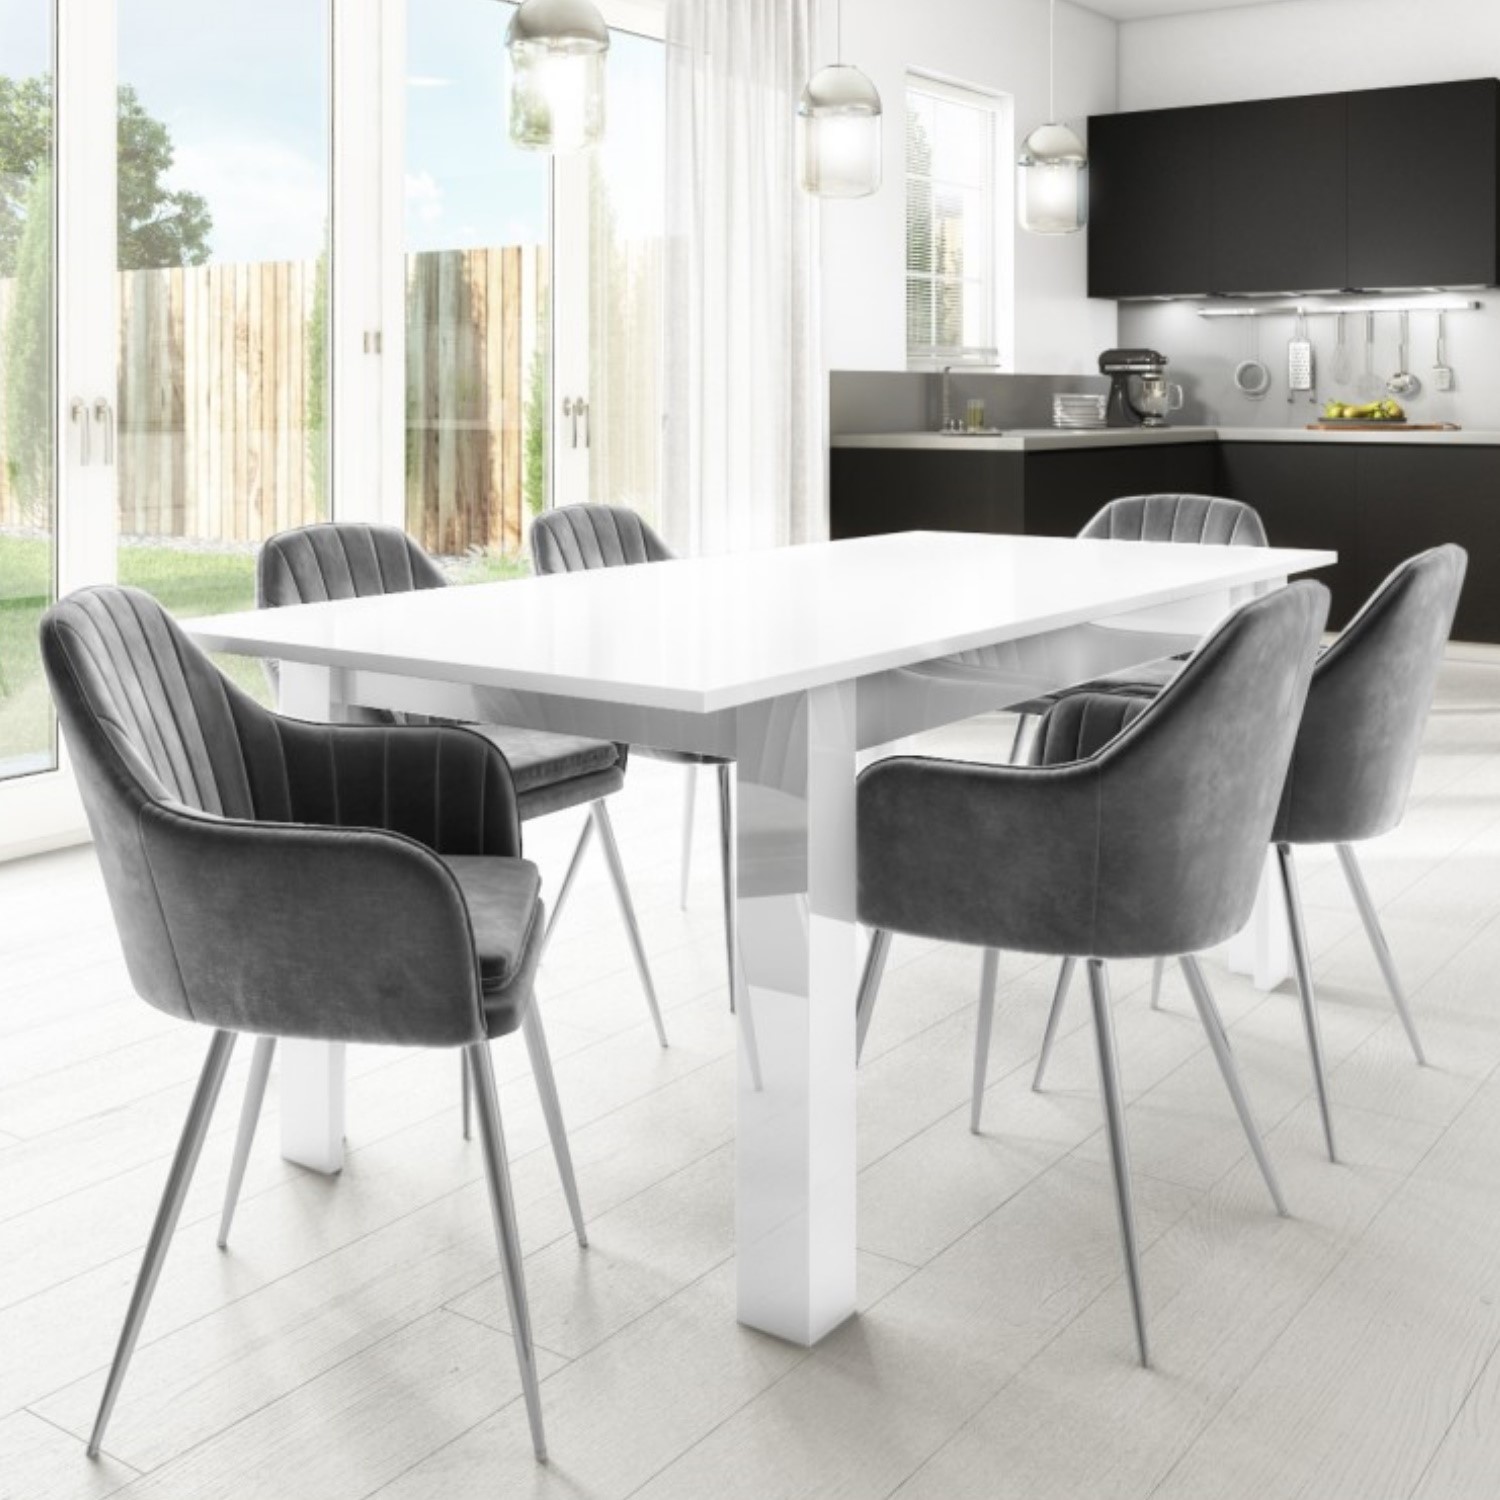 Photo of White gloss extendable dining table with 6 grey velvet dining chairs - vivienne